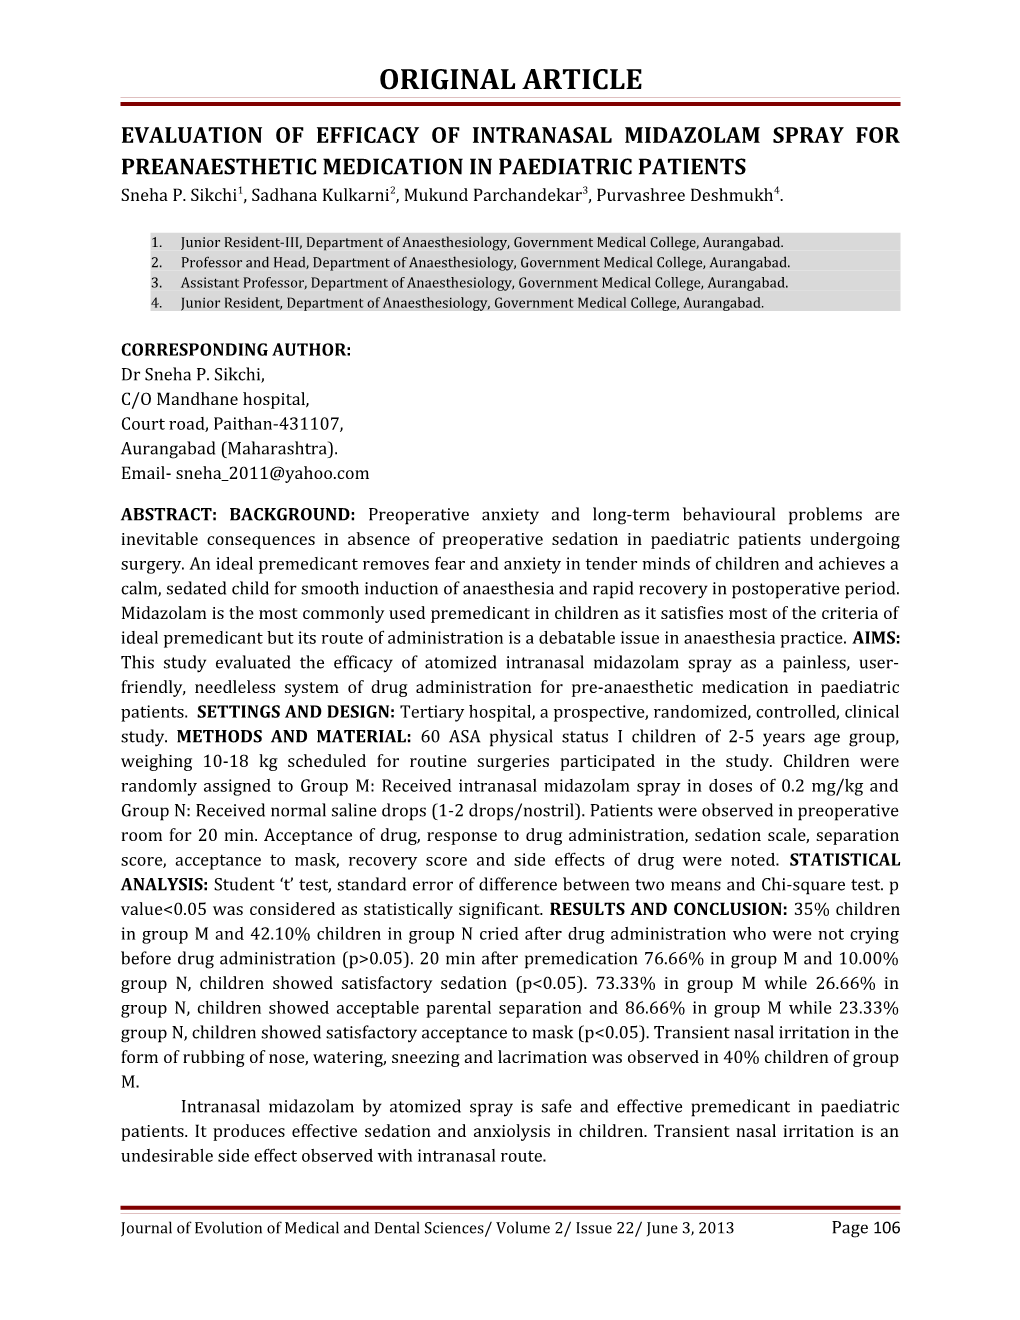 Evaluation of Efficacy of Intranasal Midazolam Spray for Preanaesthetic Medication In